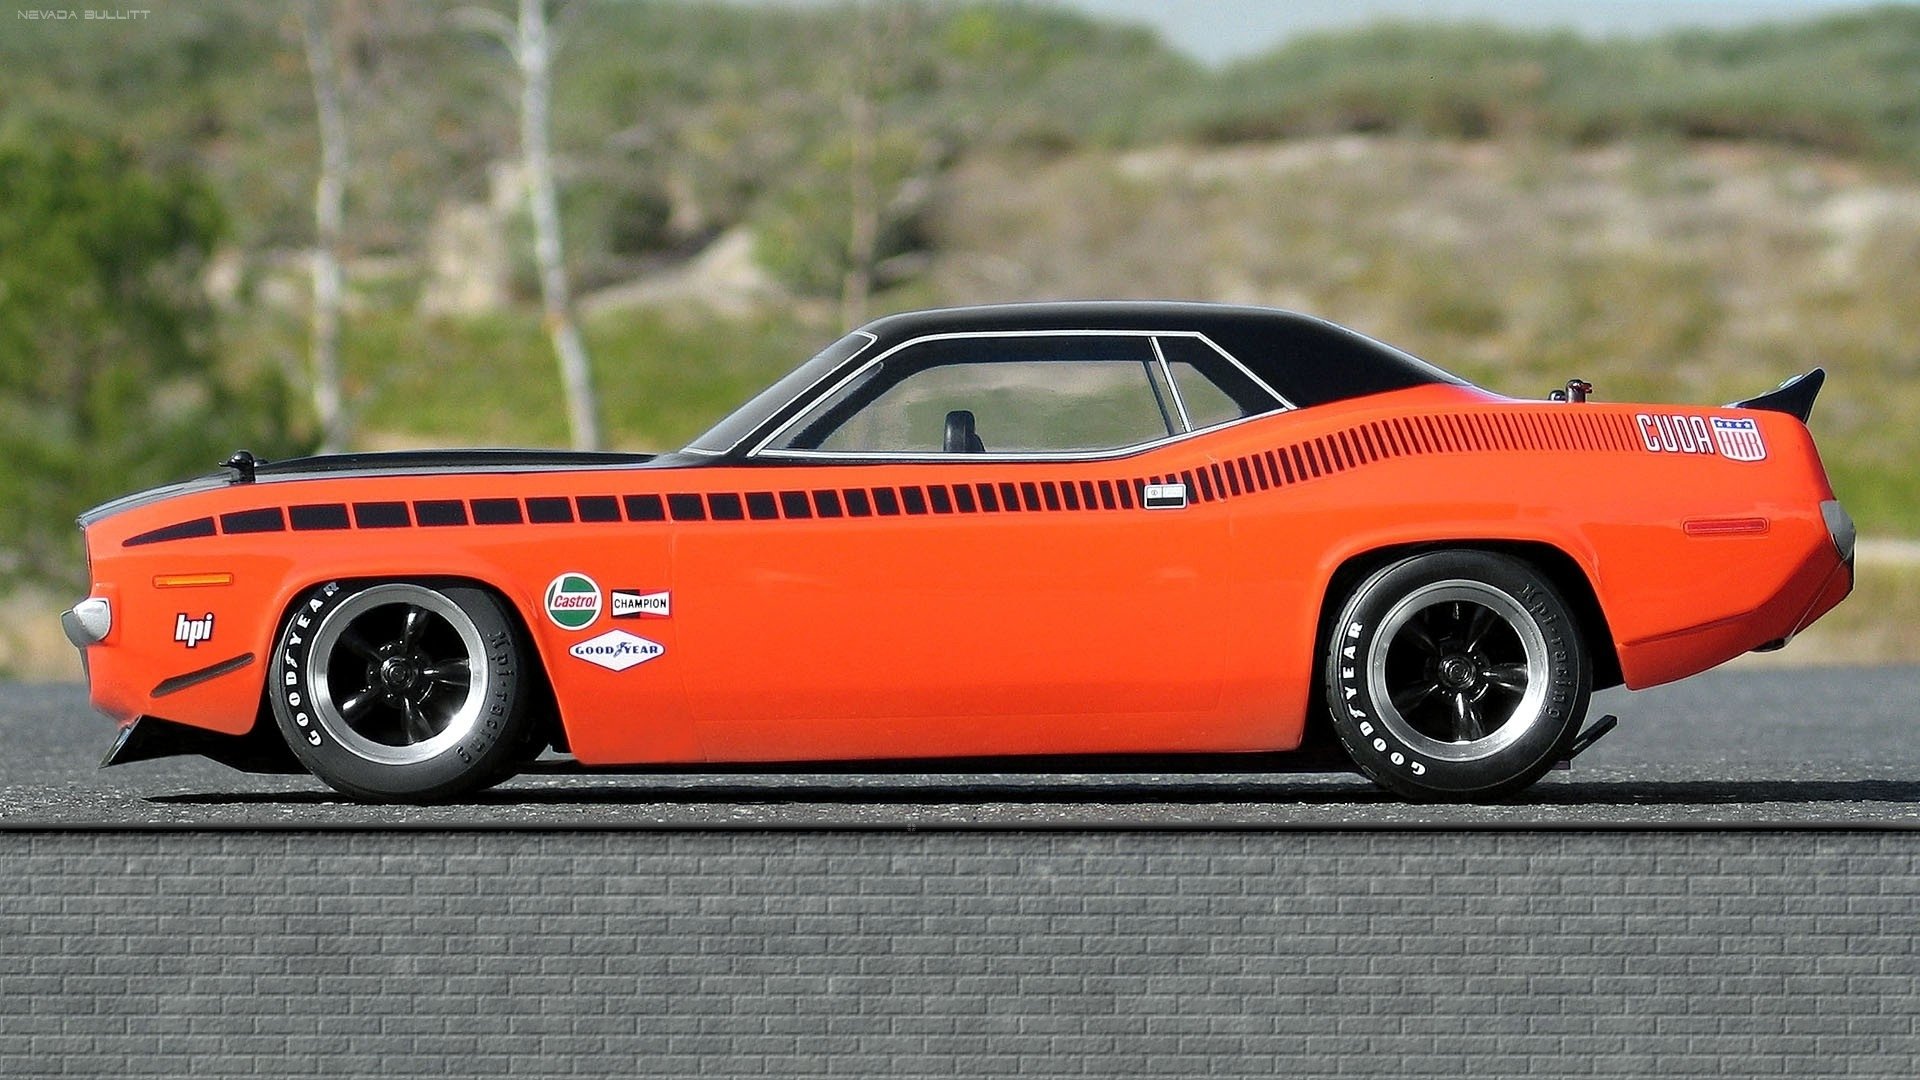 Plymouth Barracuda HD Wallpaper | Background Image ...